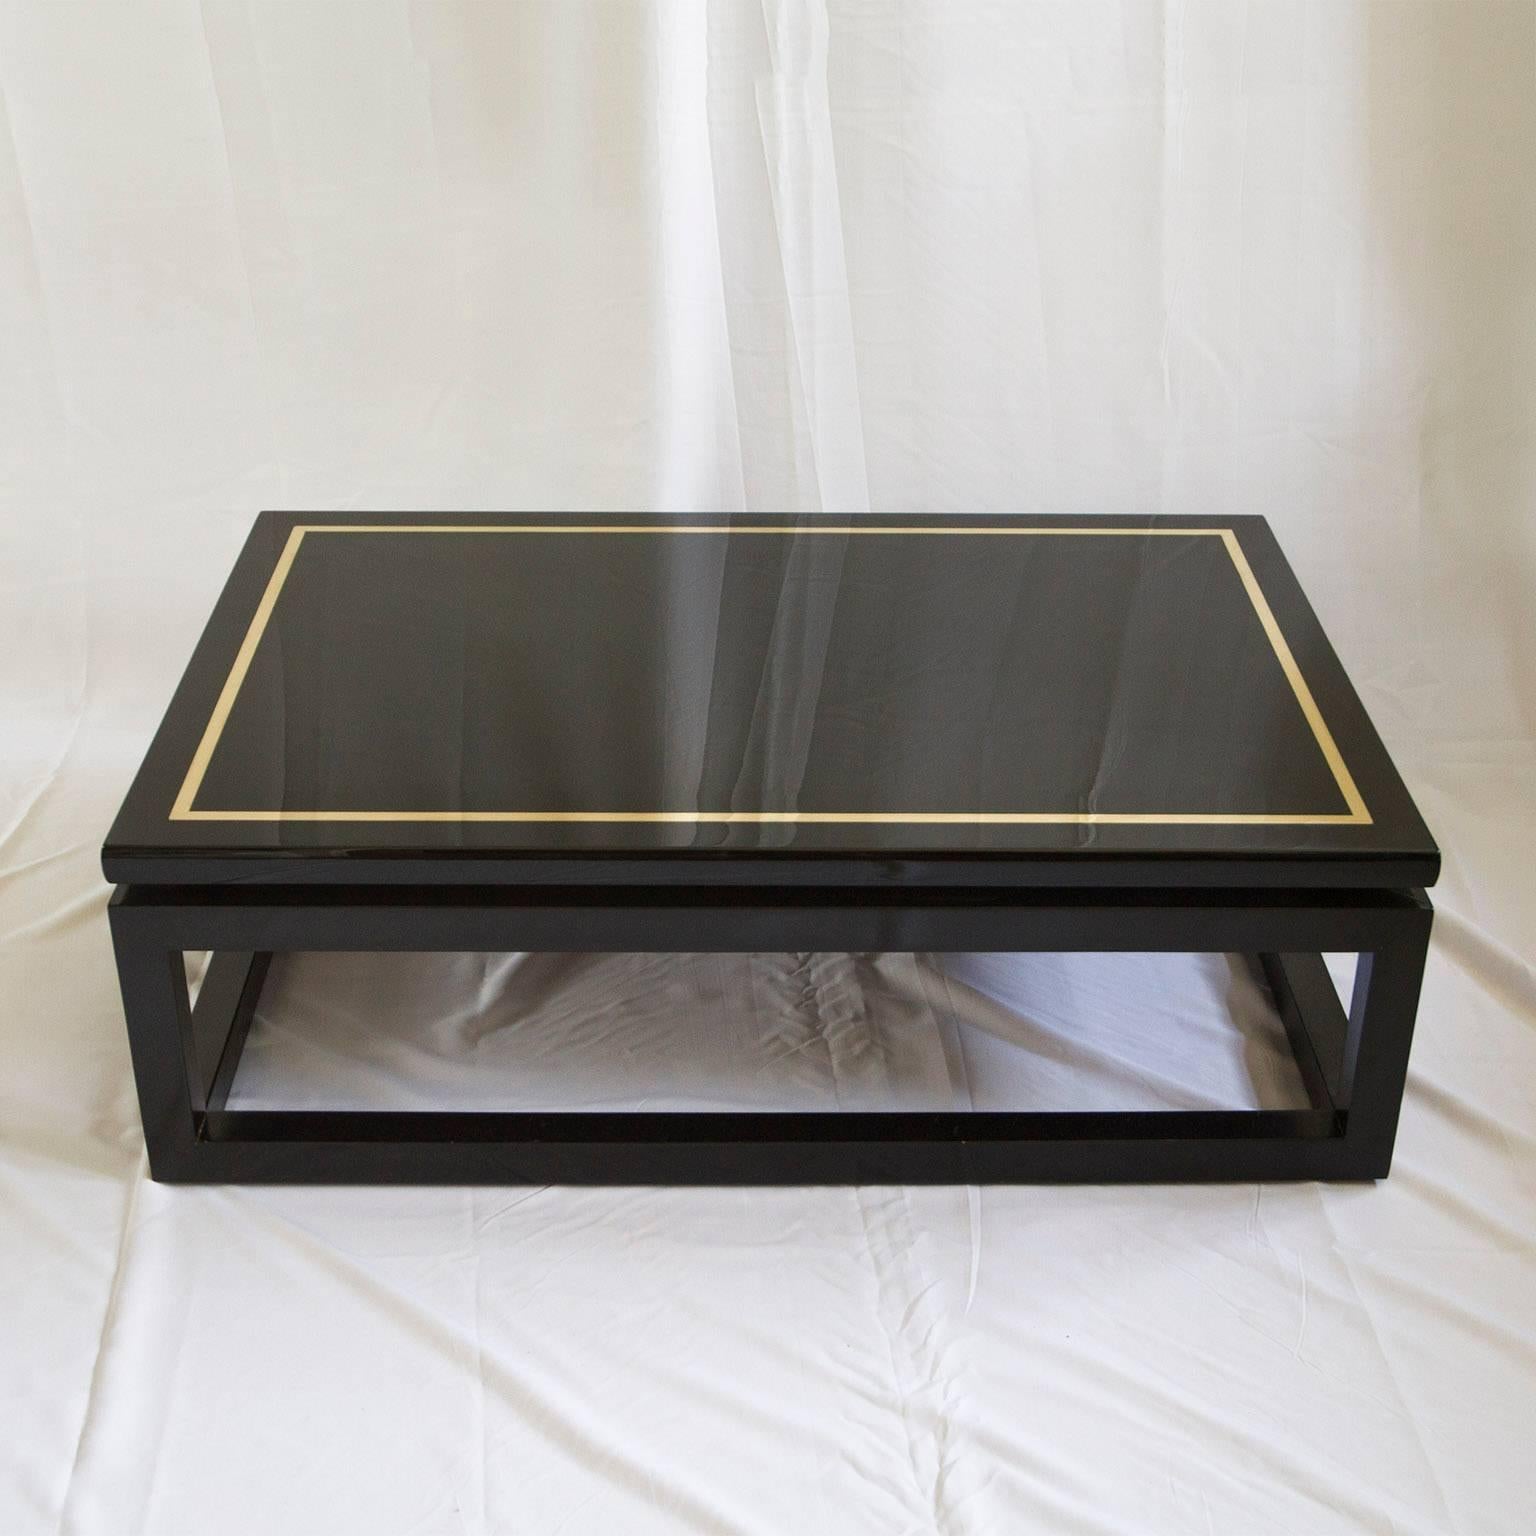 Black lacquer and brass coffee table in beautiful state. We also offer a matching pair of side tables.